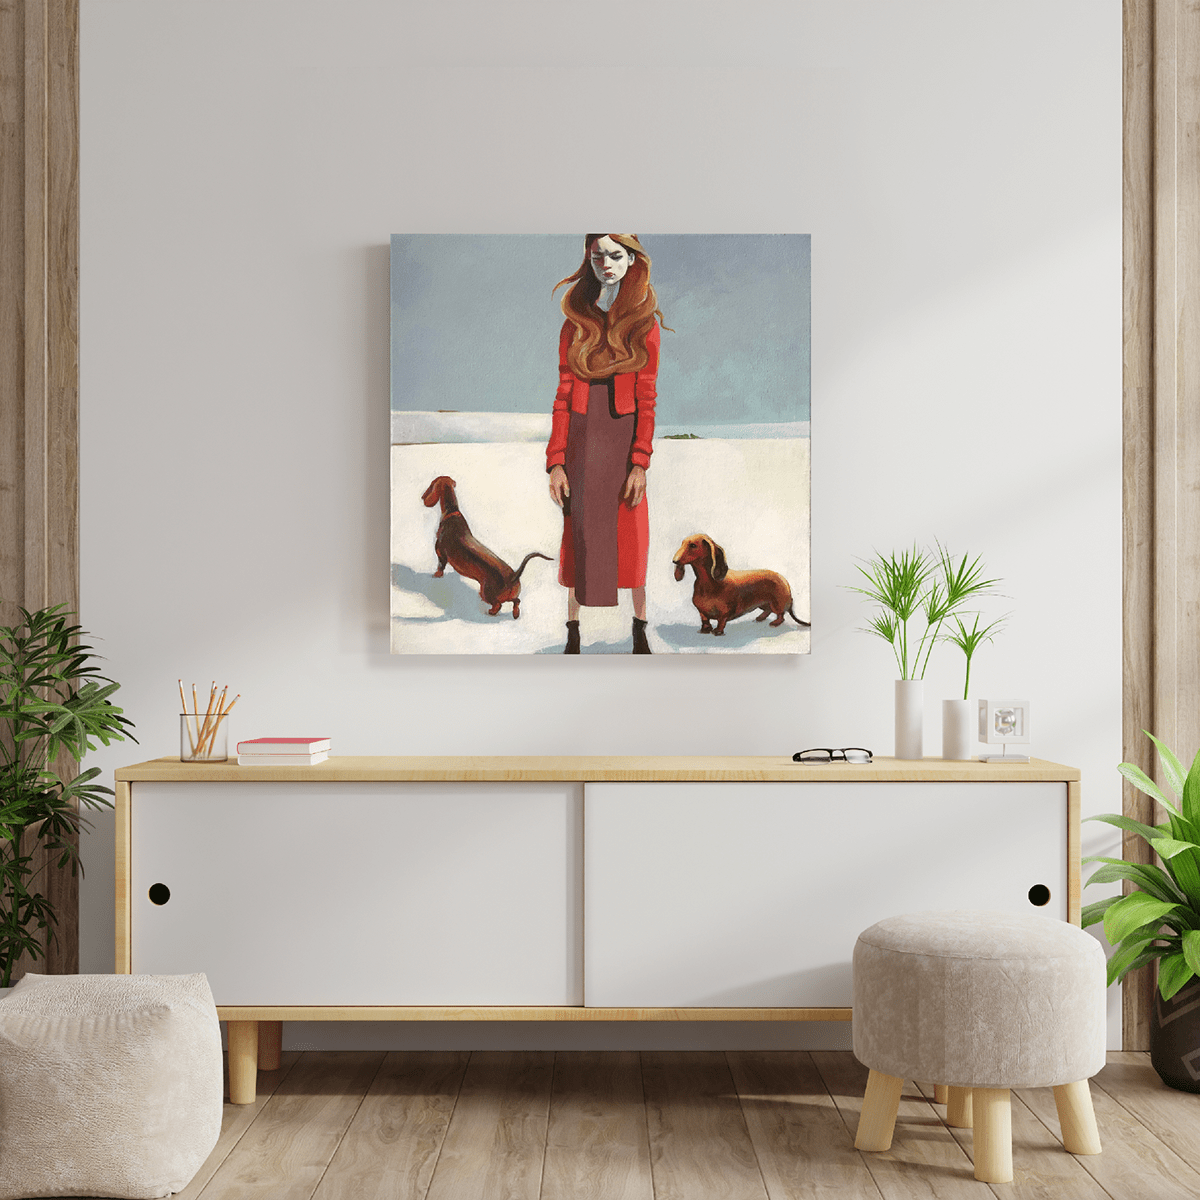 annoyance contemporary art Contemporary Landscape dachshund long hair winter woman in red